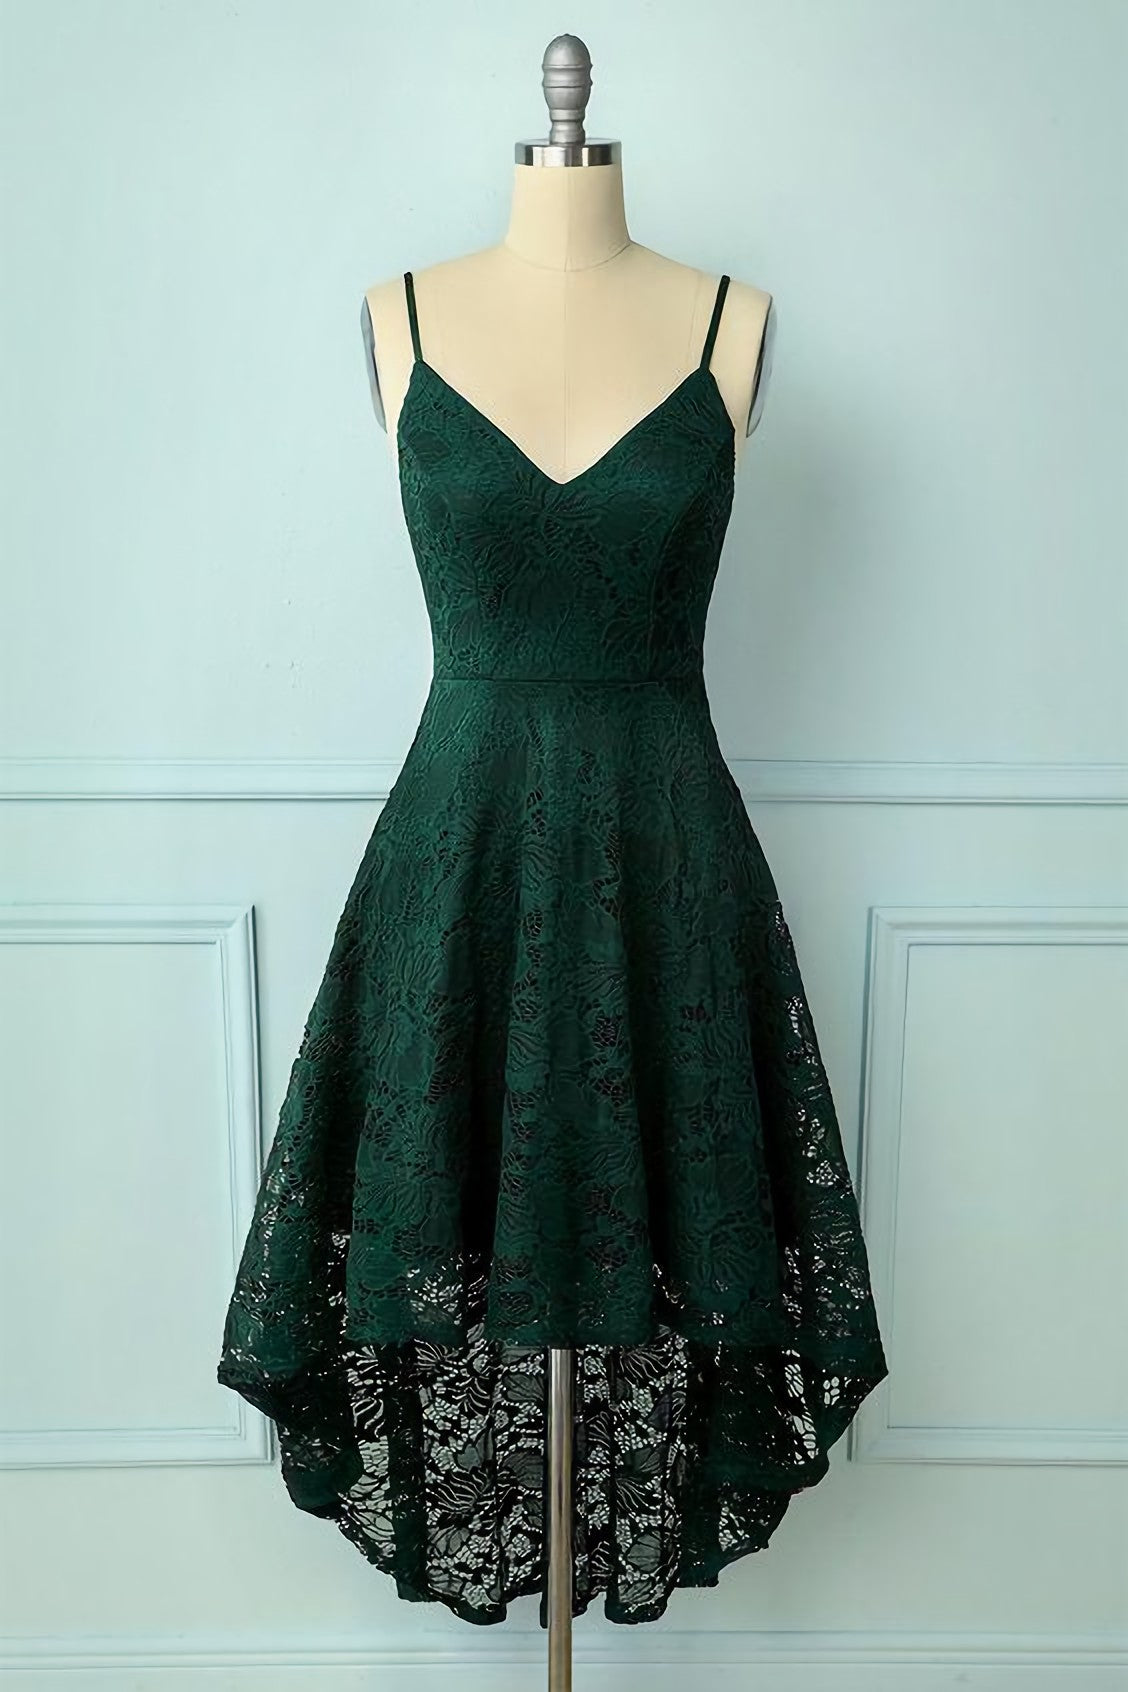 Party Dress Hijab, Vintage Style Dark Green Lace Shoulders Straps Prom Dress